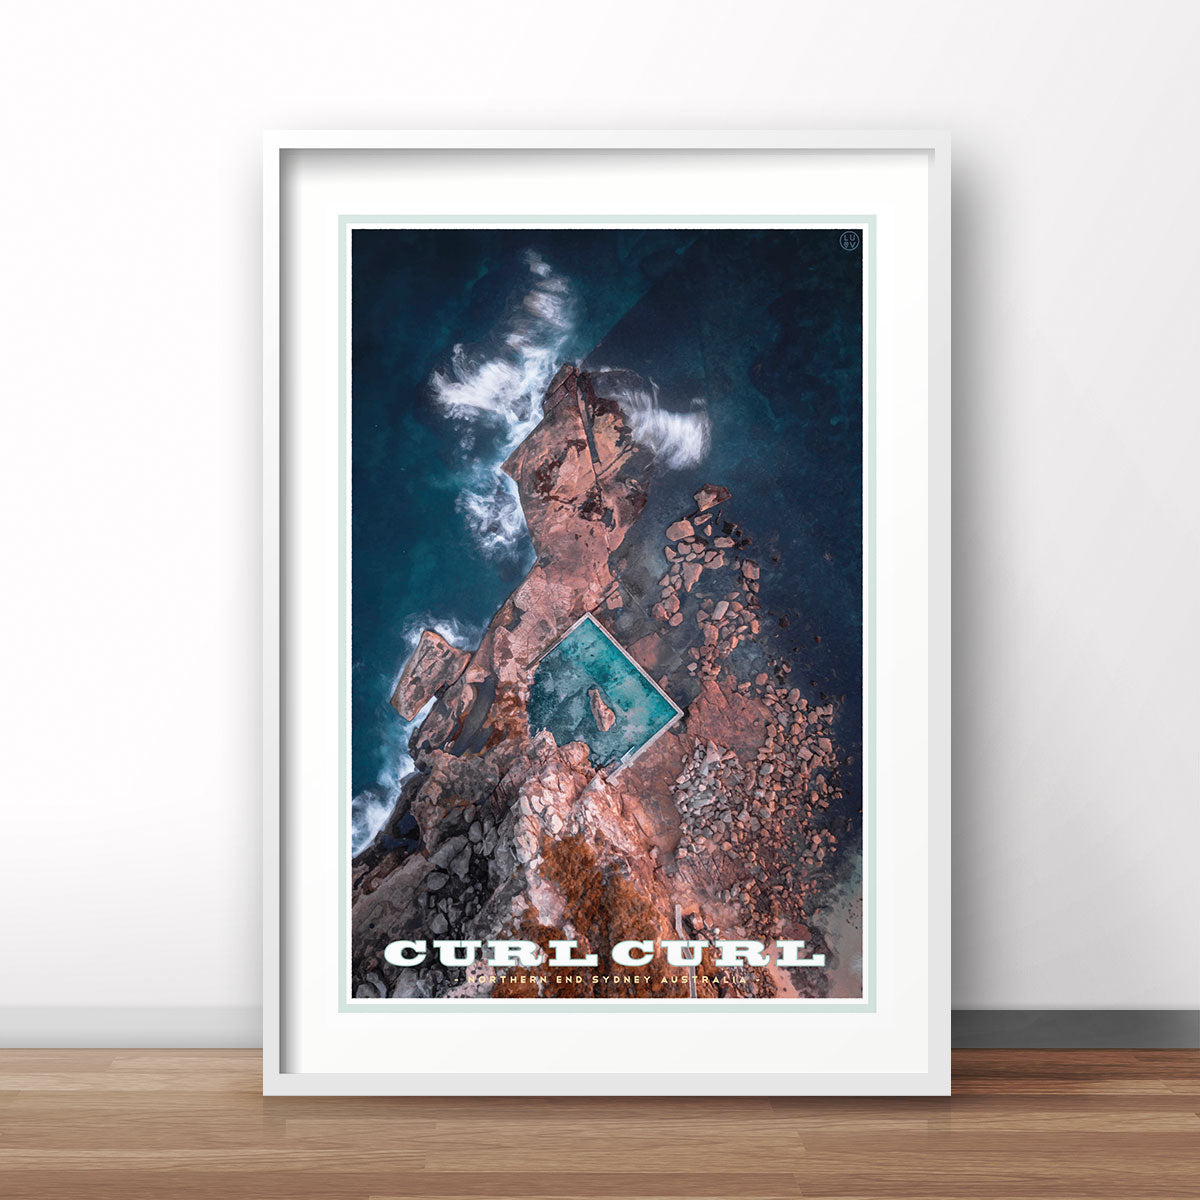 North Curl Curl Pool vintage travel style print by places we luv 